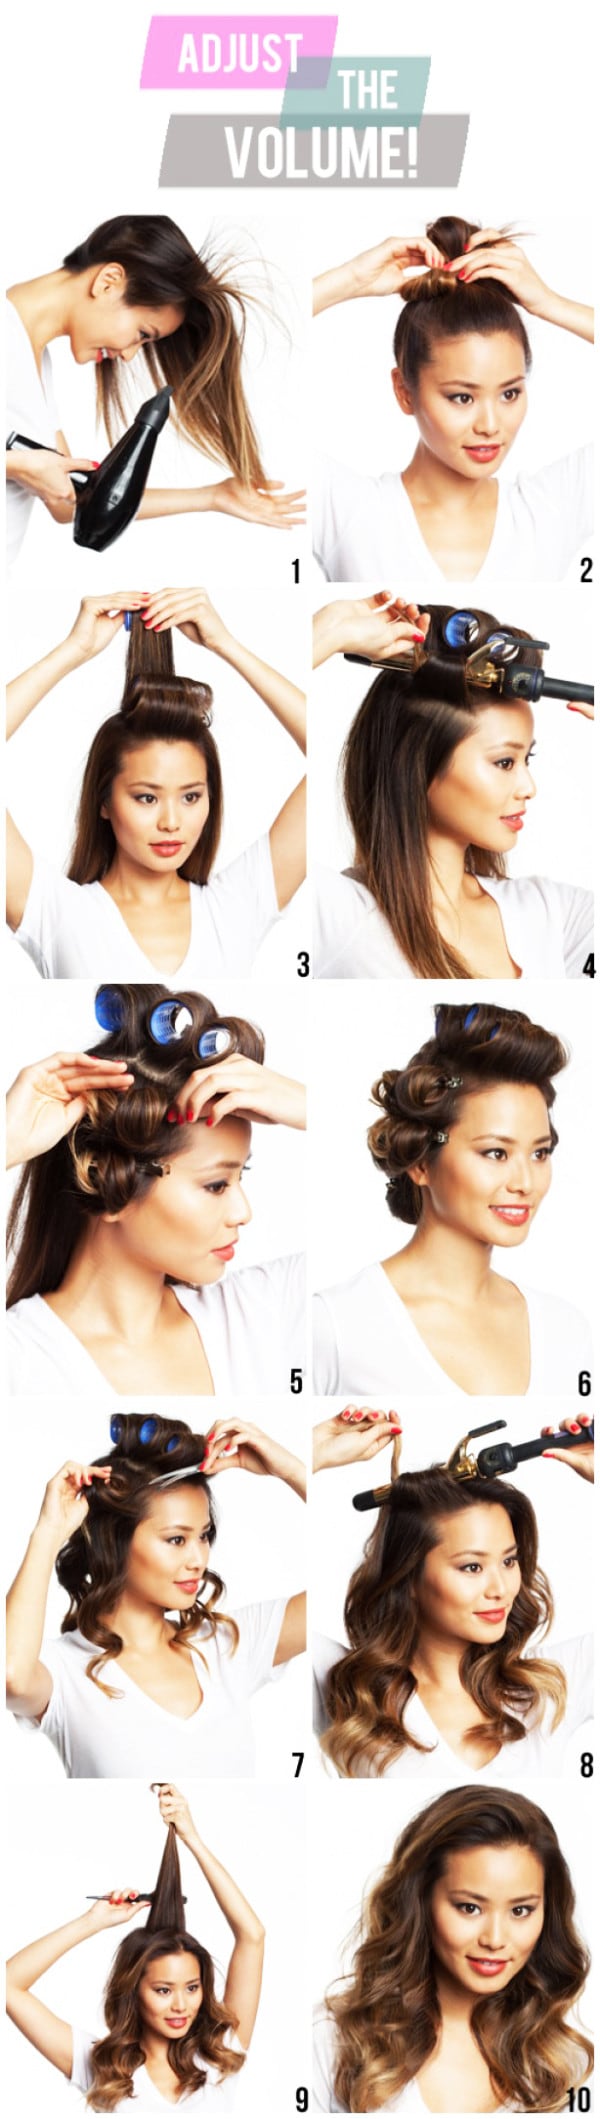 15 Very Amiable And Very Simple DIY Hairstyle Tutorials